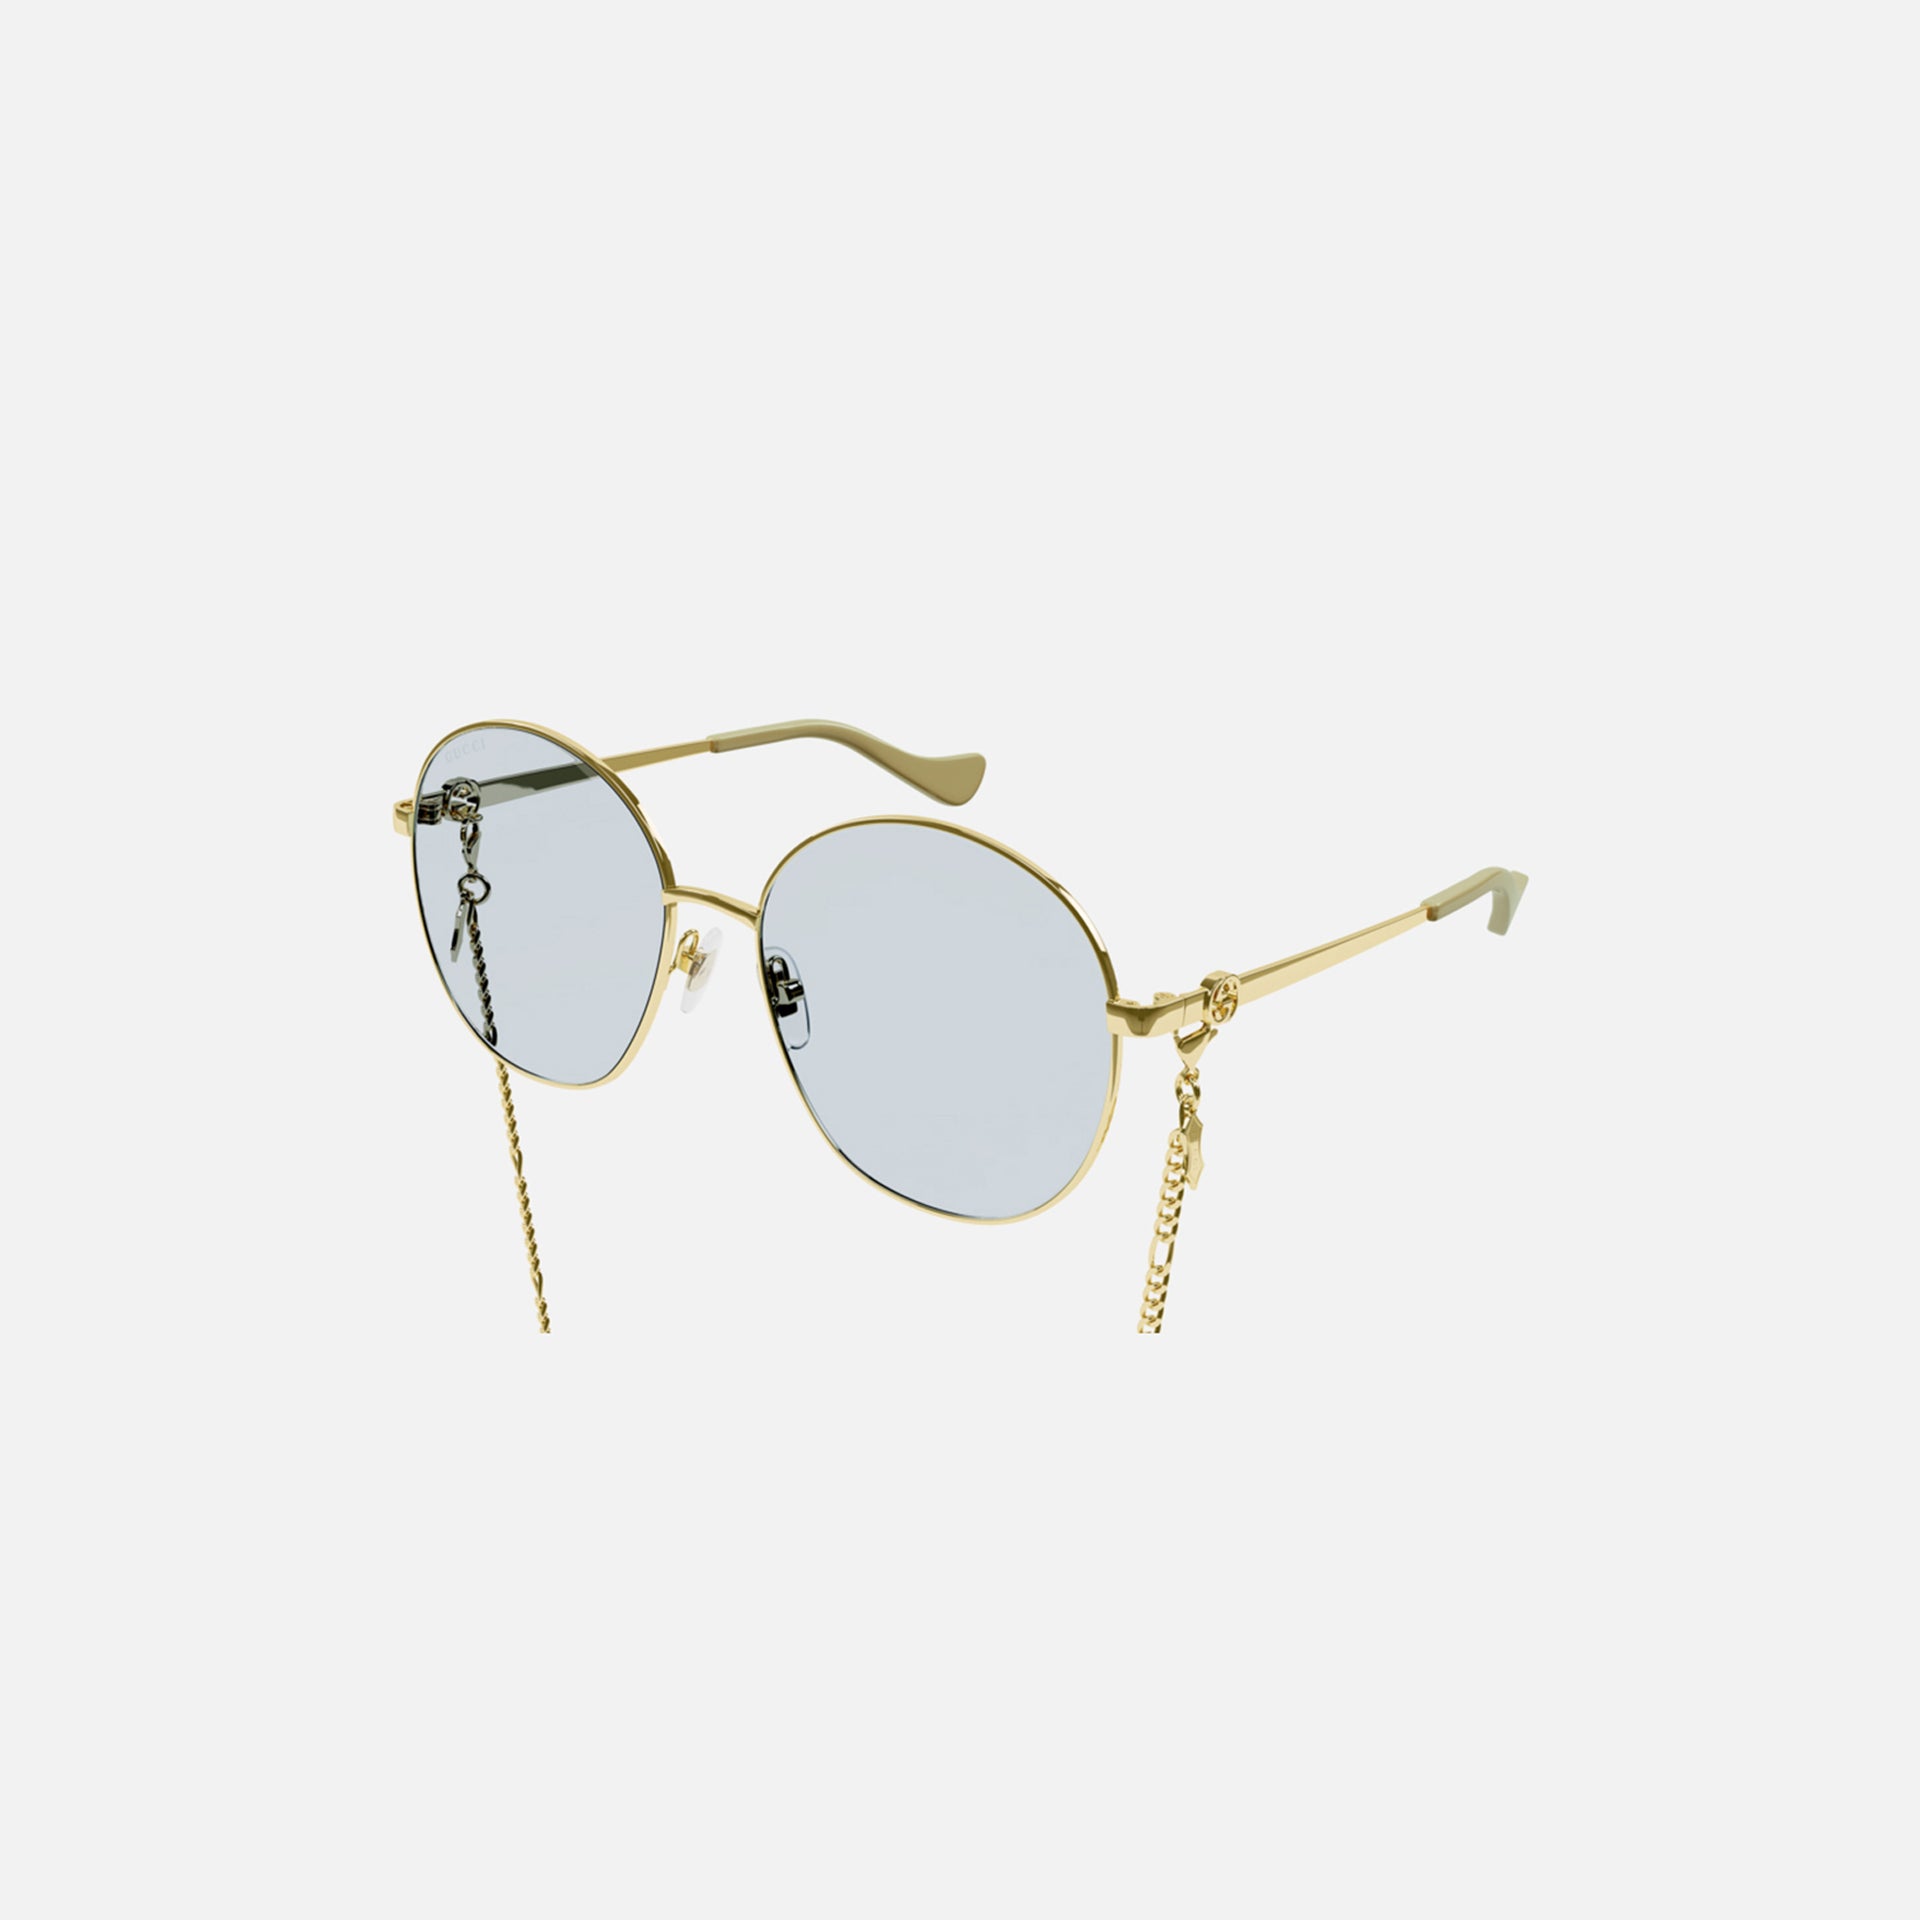 Gucci Eyewear Small Wire Circle Frame - Blue Lens w/ Gold Chain